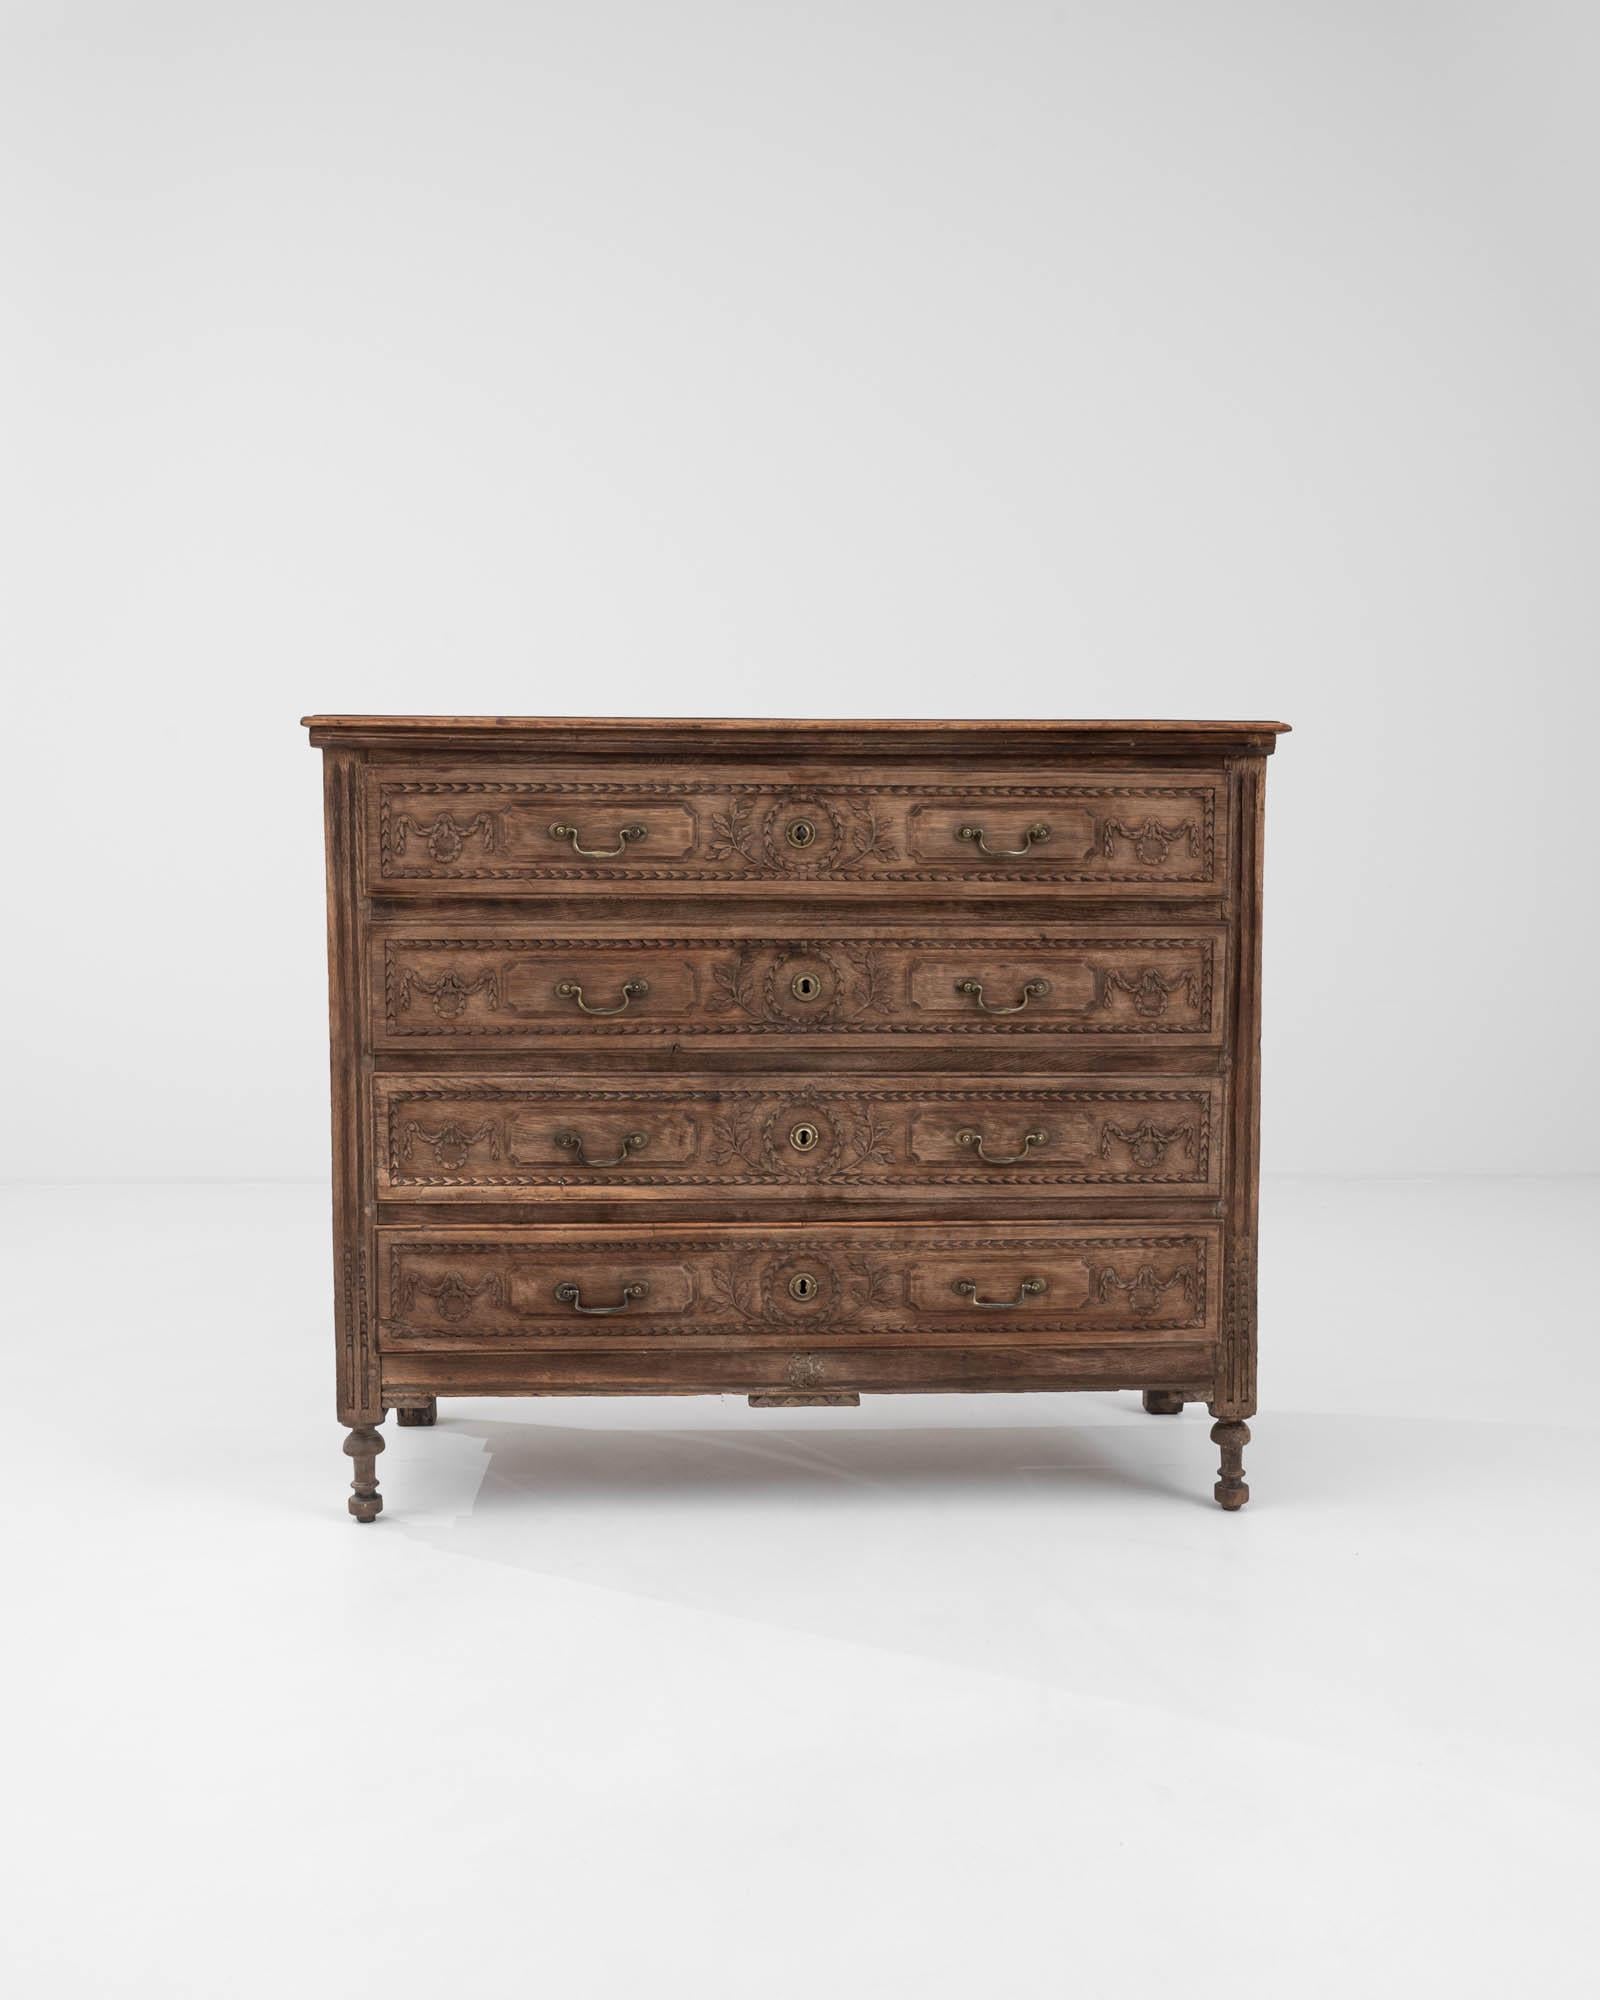 Artfully carved festoons and laurel wreaths embellish the four drawers of this 19th-century chest, crafted in France from refined wood. The richly adorned front harmoniously complements the meticulously carved geometric legs and elegant bail pulls,